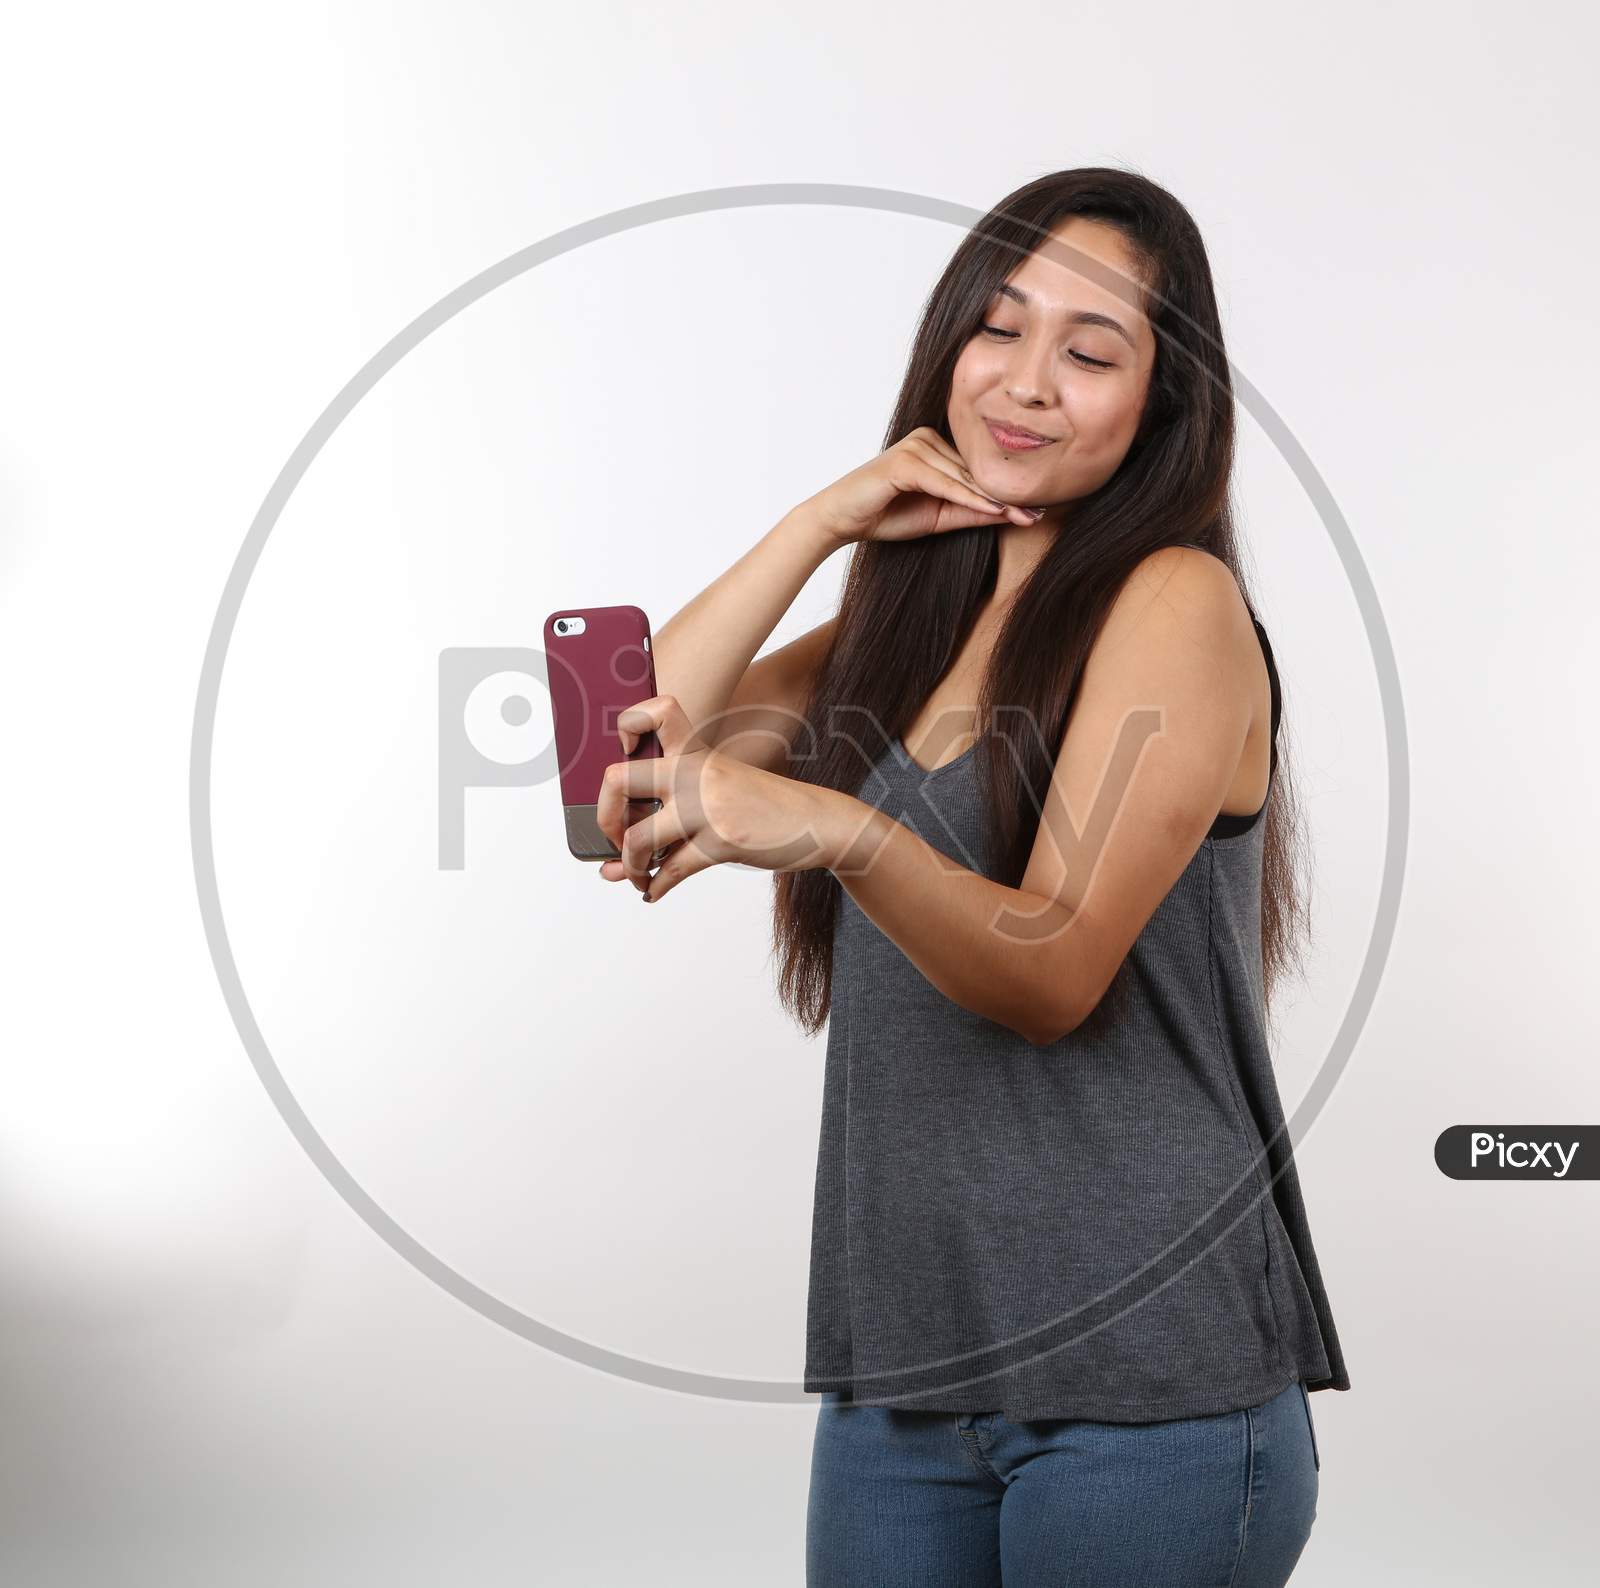 An Attractive Latina Wearing Glasses And A Grey Shirt Smiles As She Holds Her Cell Phone Up To Take A Picture.